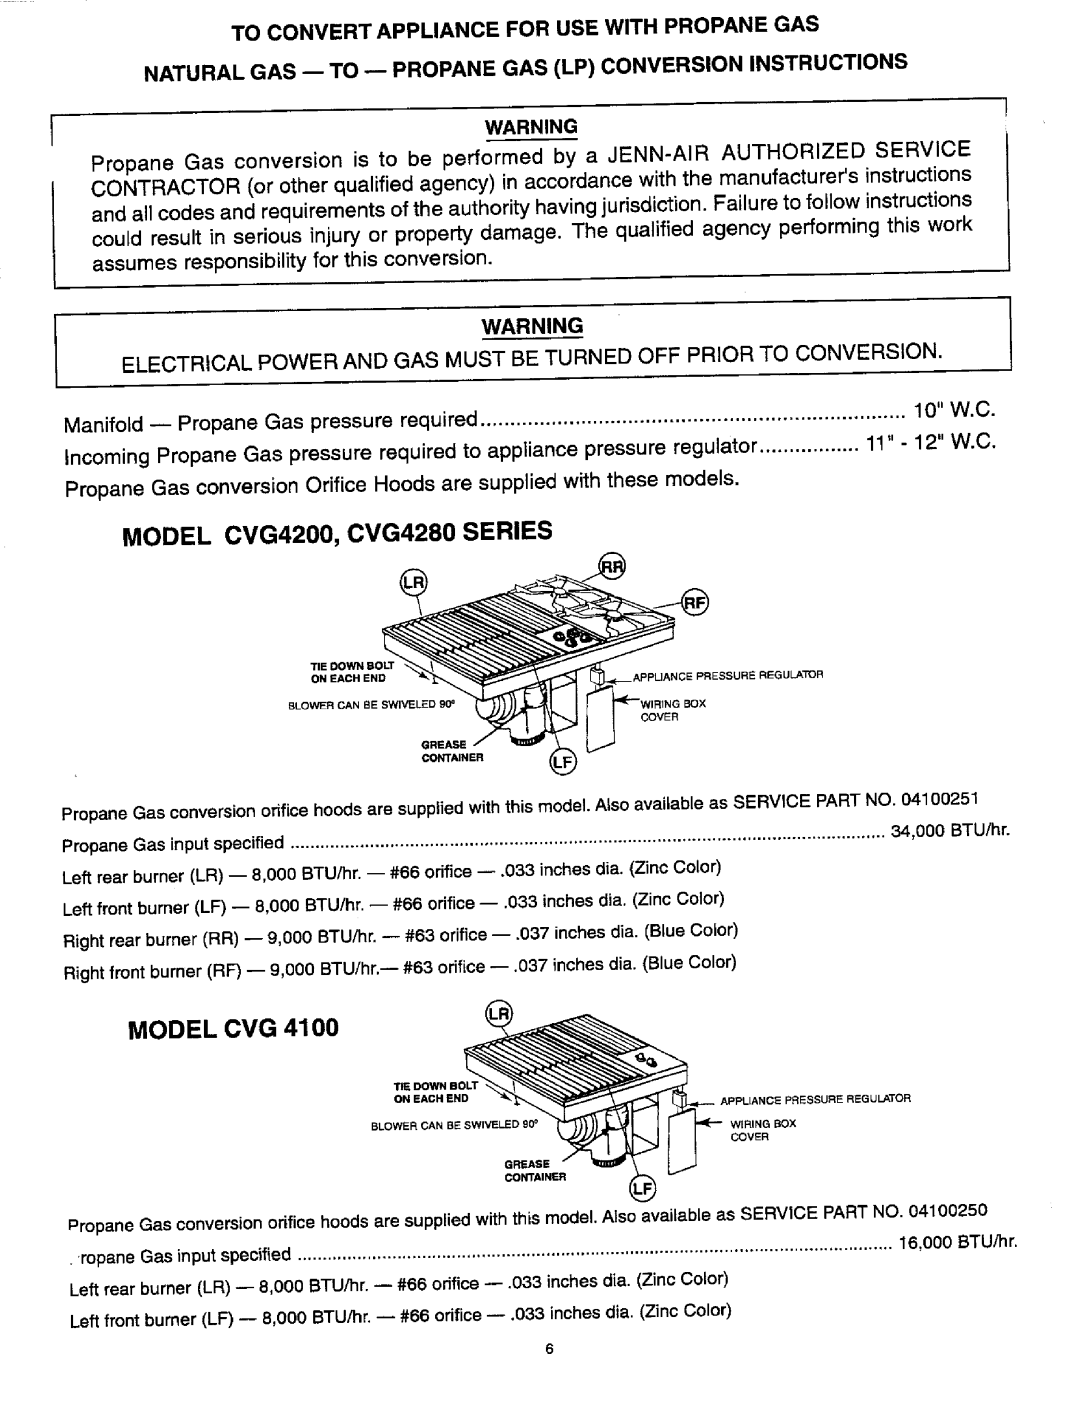 Jenn-Air 209240 installation instructions To Convert Appliance For Use With Propanegas 